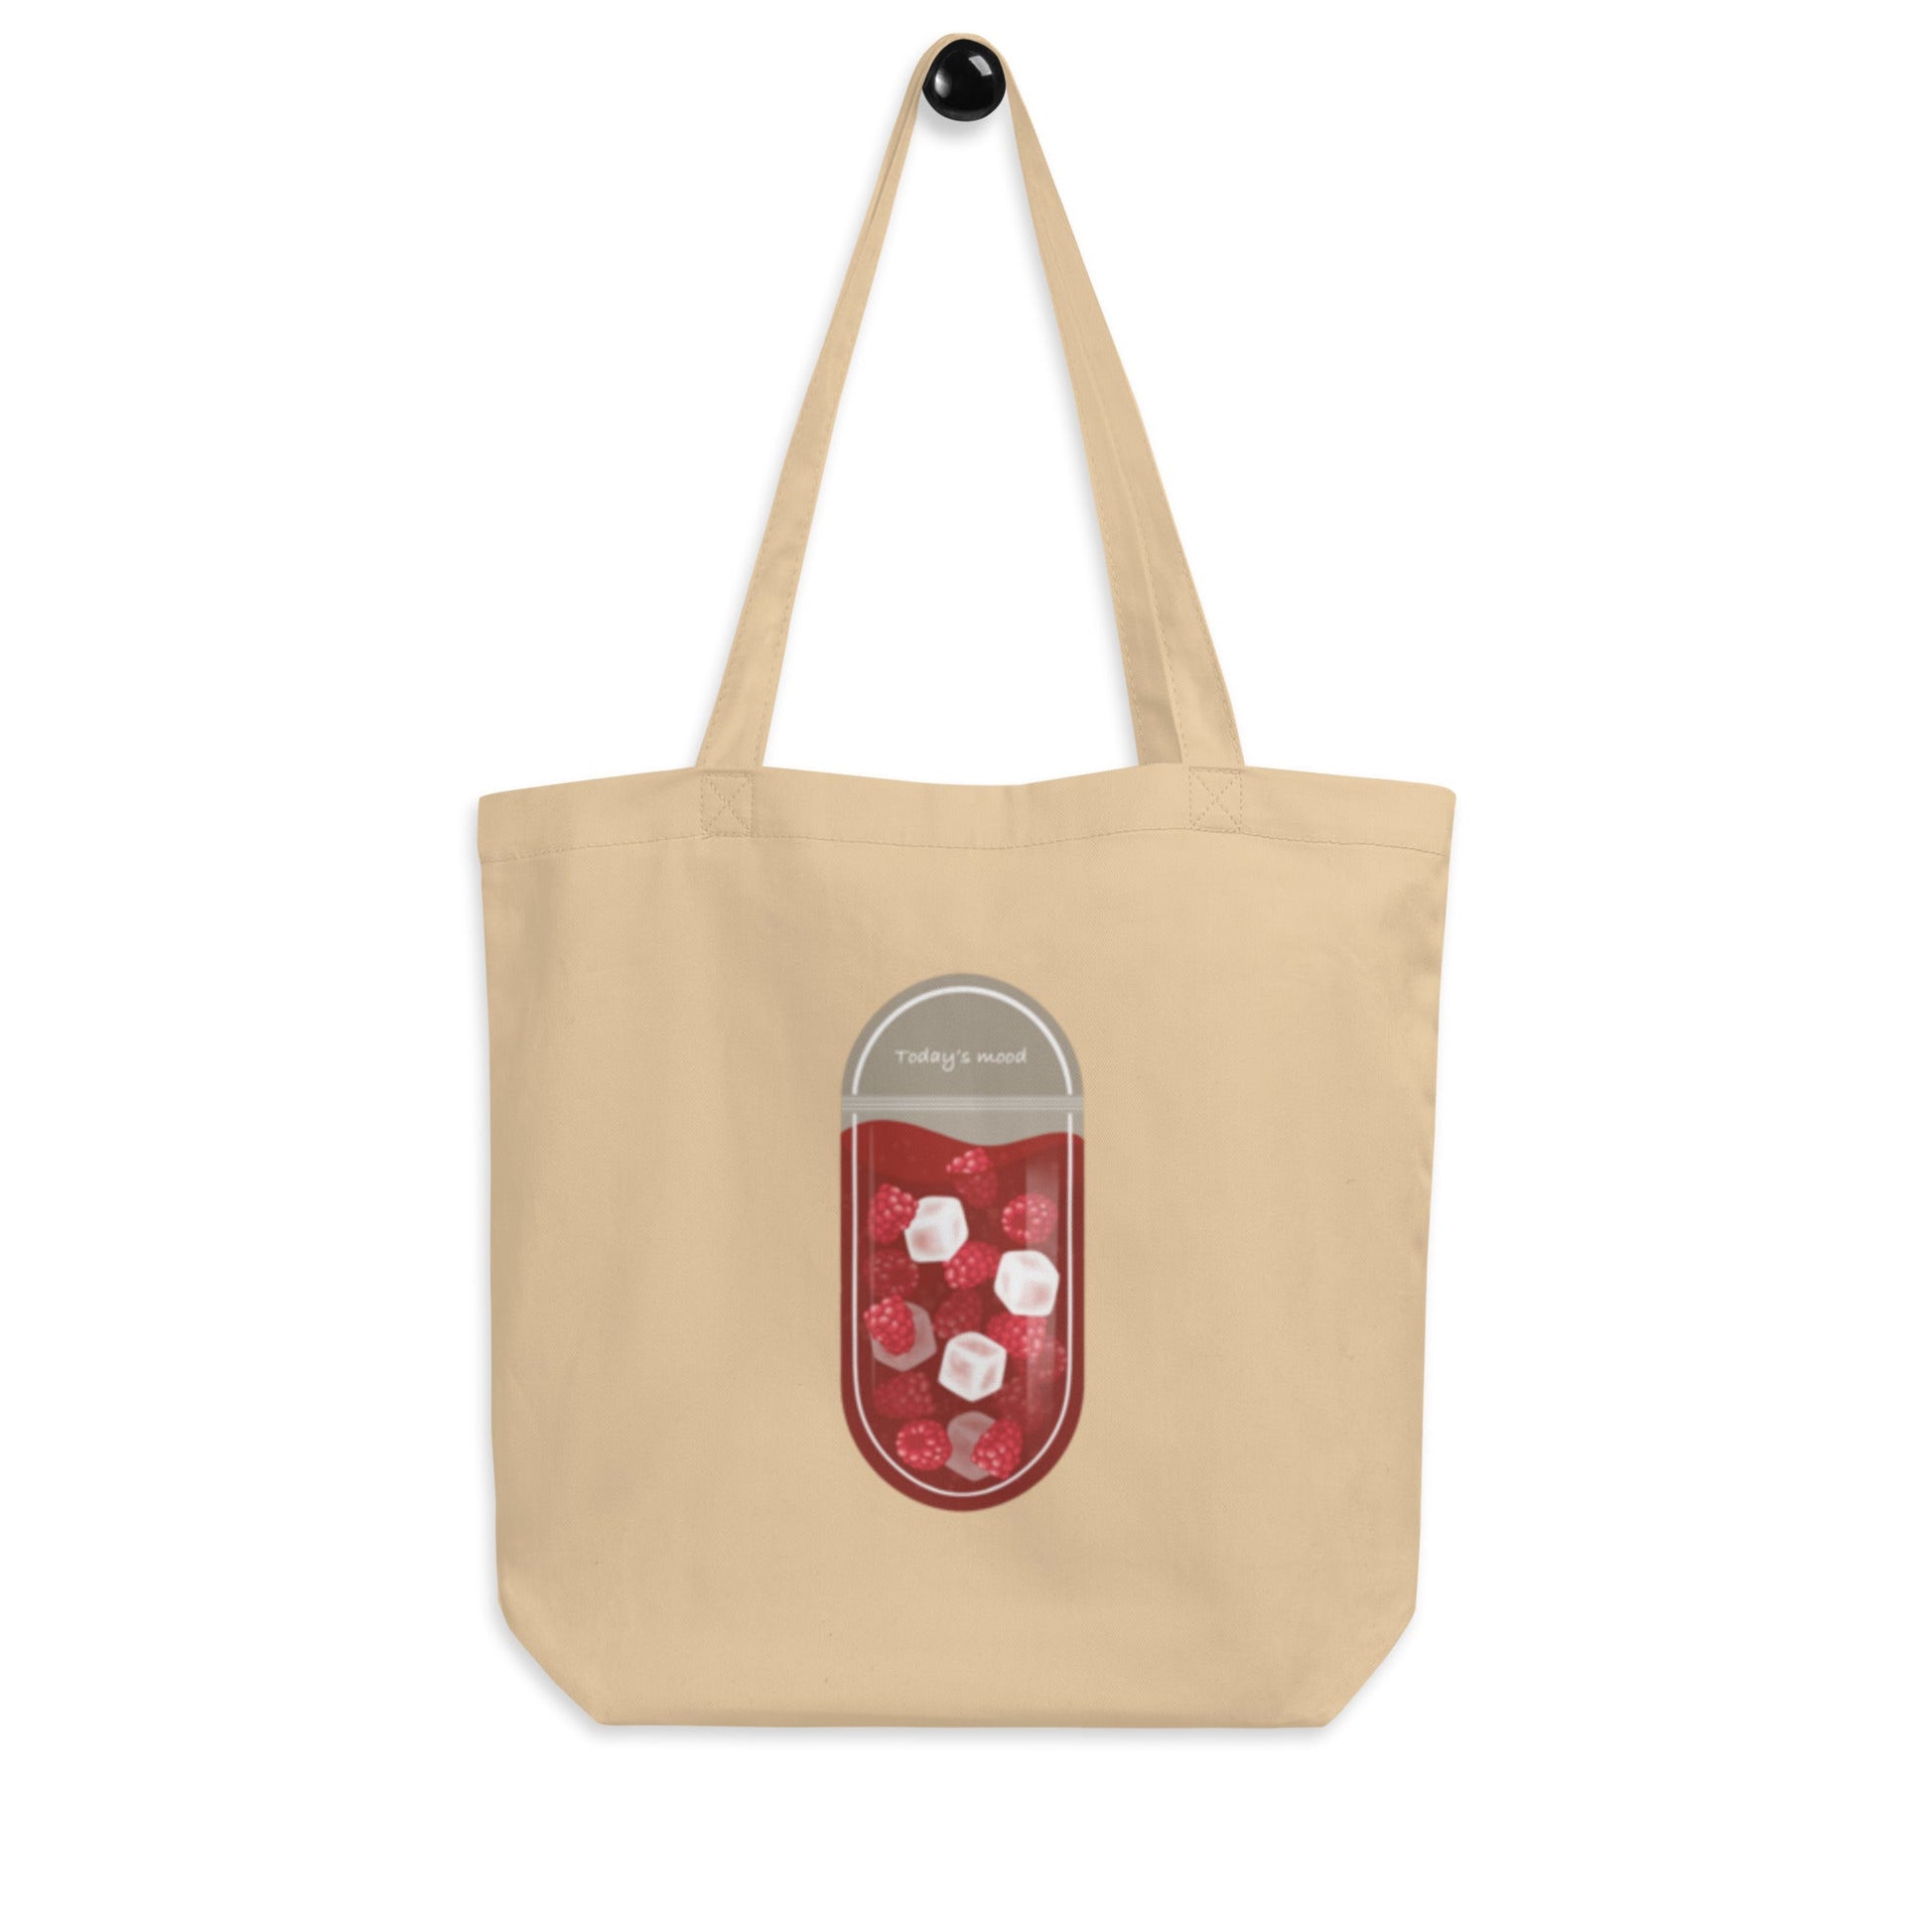 eco-tote-bag-todays-mood-3-oyster